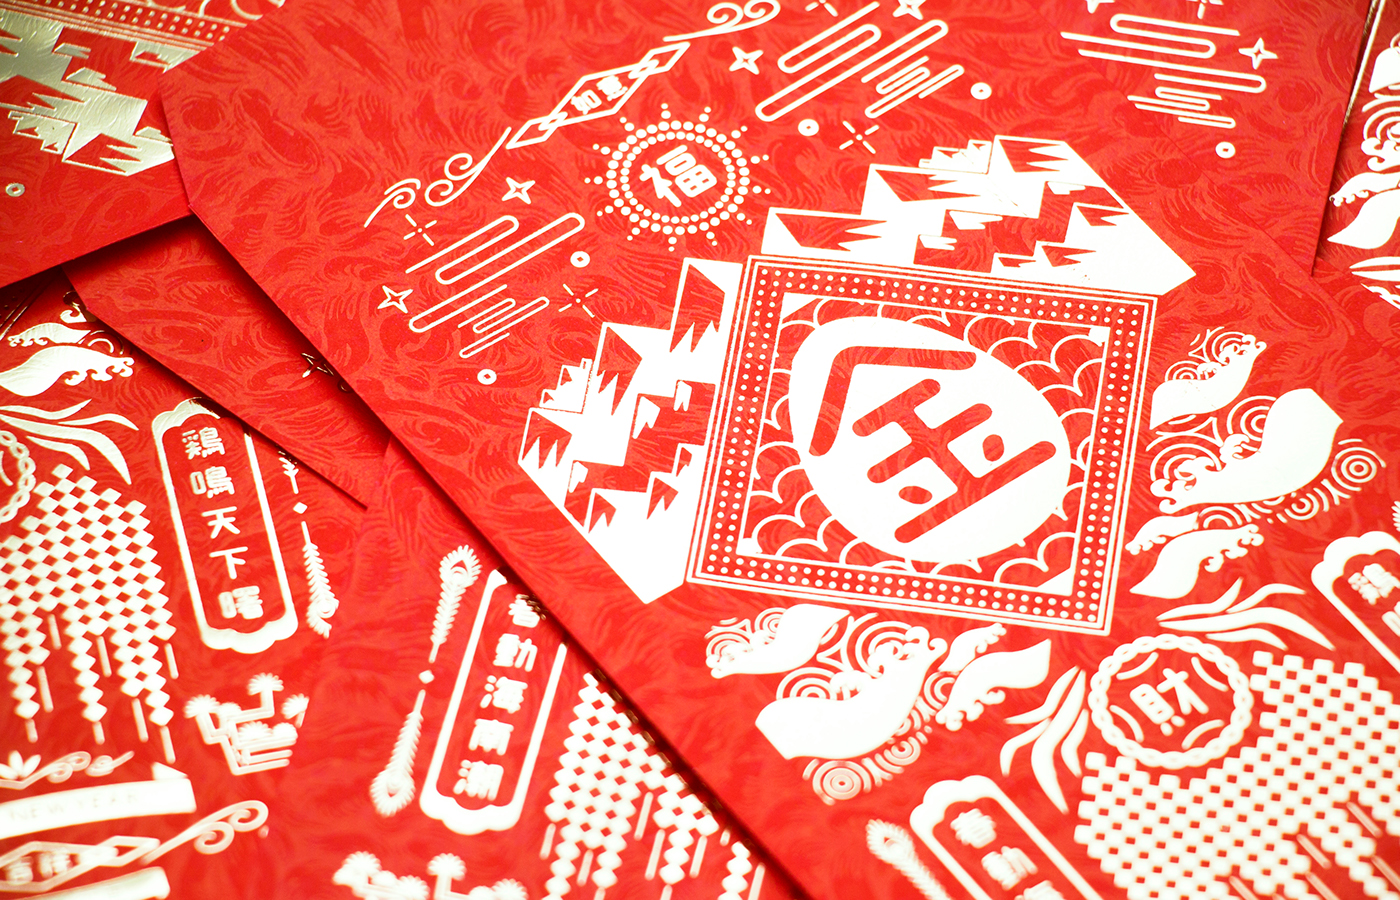 Sun newyear Red Envelope graphic design  雞年 gold Rooster 丁酉 紅包